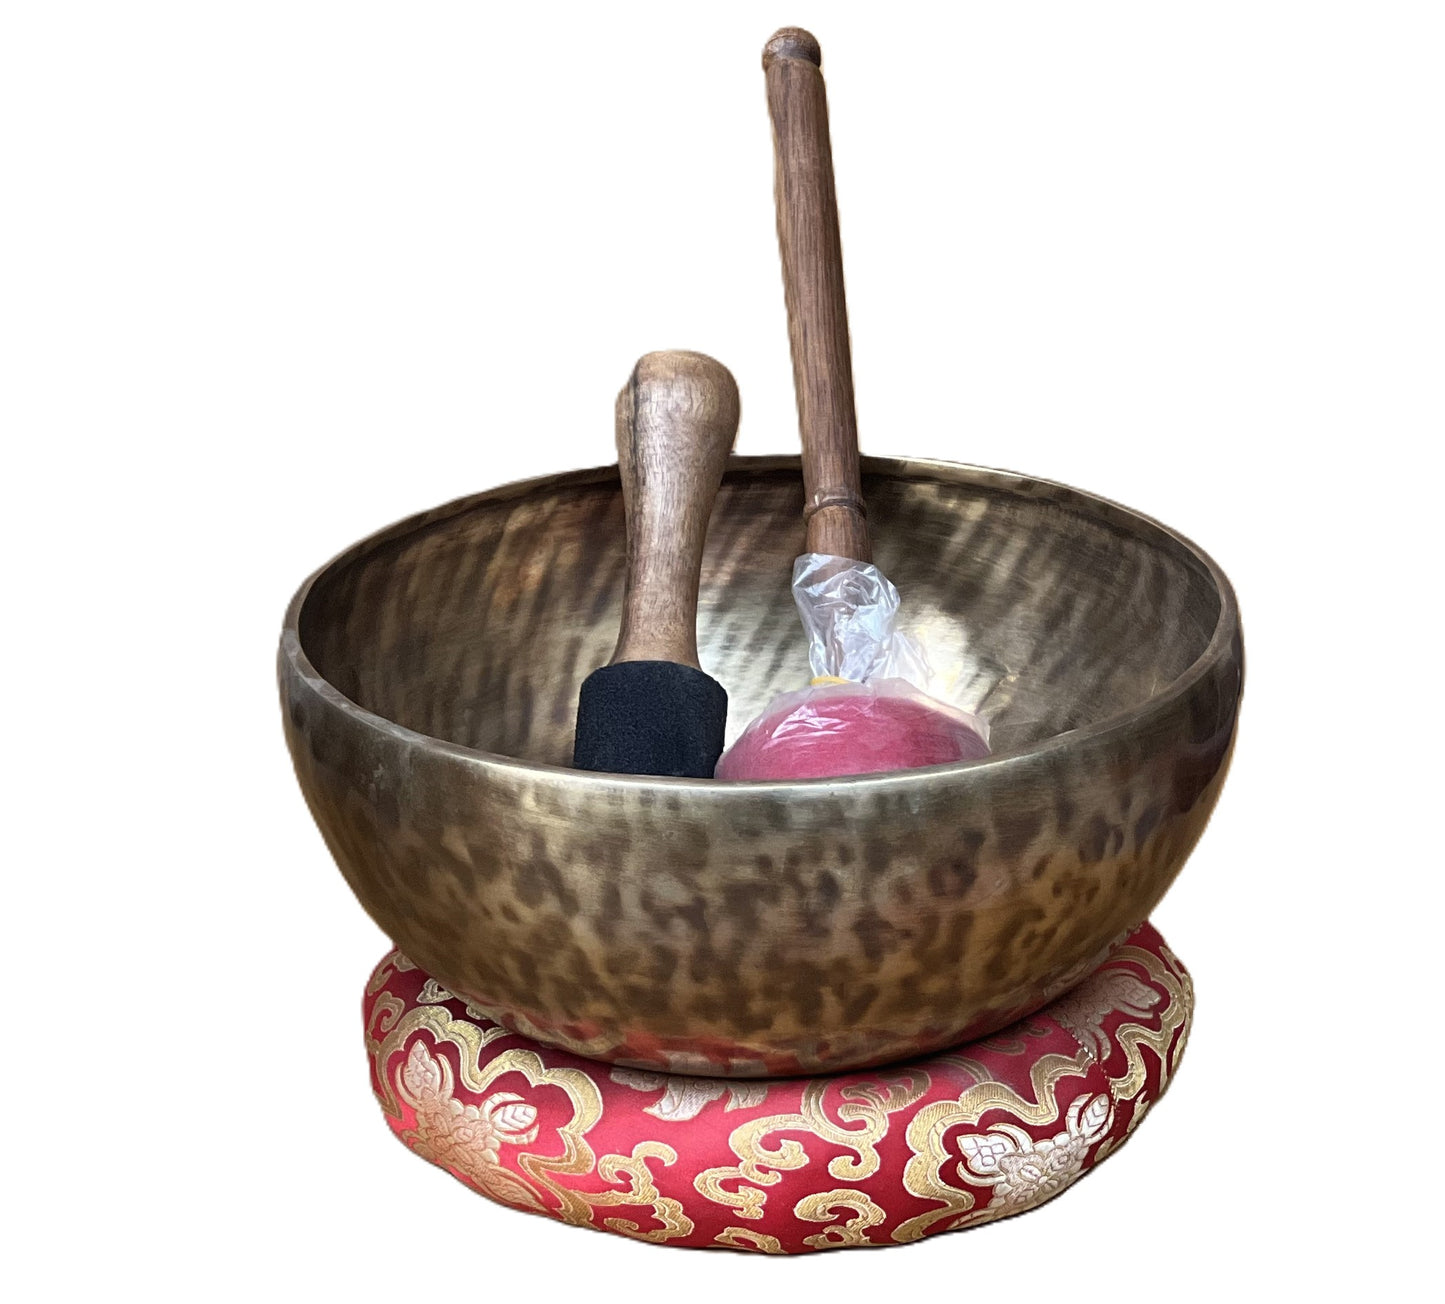 HAND-HAMMERED/ HANDMADE MEDIUM SIZE TIBETAN SINGING BOWL FROM NEPAL SUPPLIED WITH FREE CUSHION AND MALLET